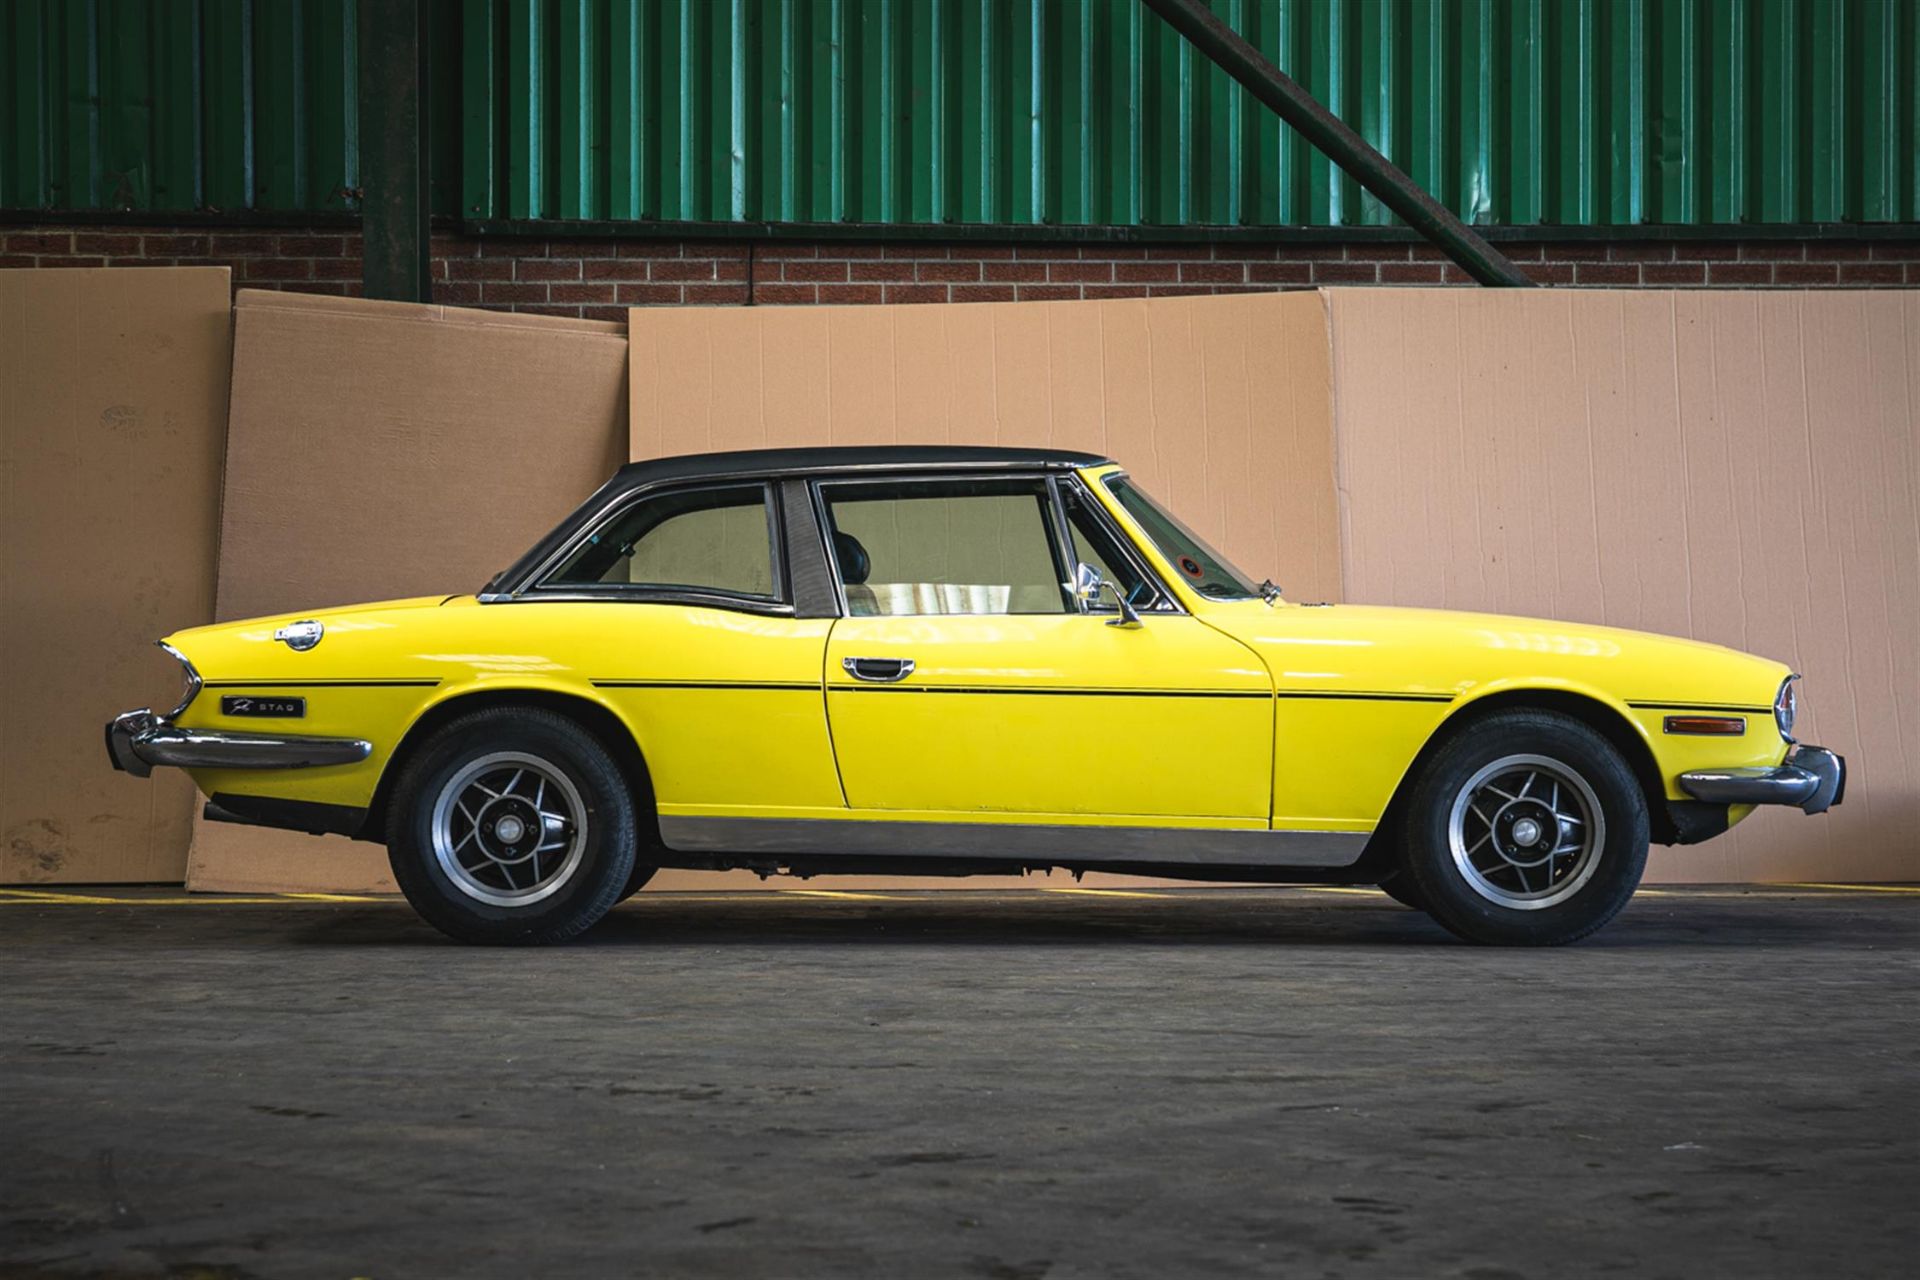 1977 Triumph Stag MKII - Image 3 of 12